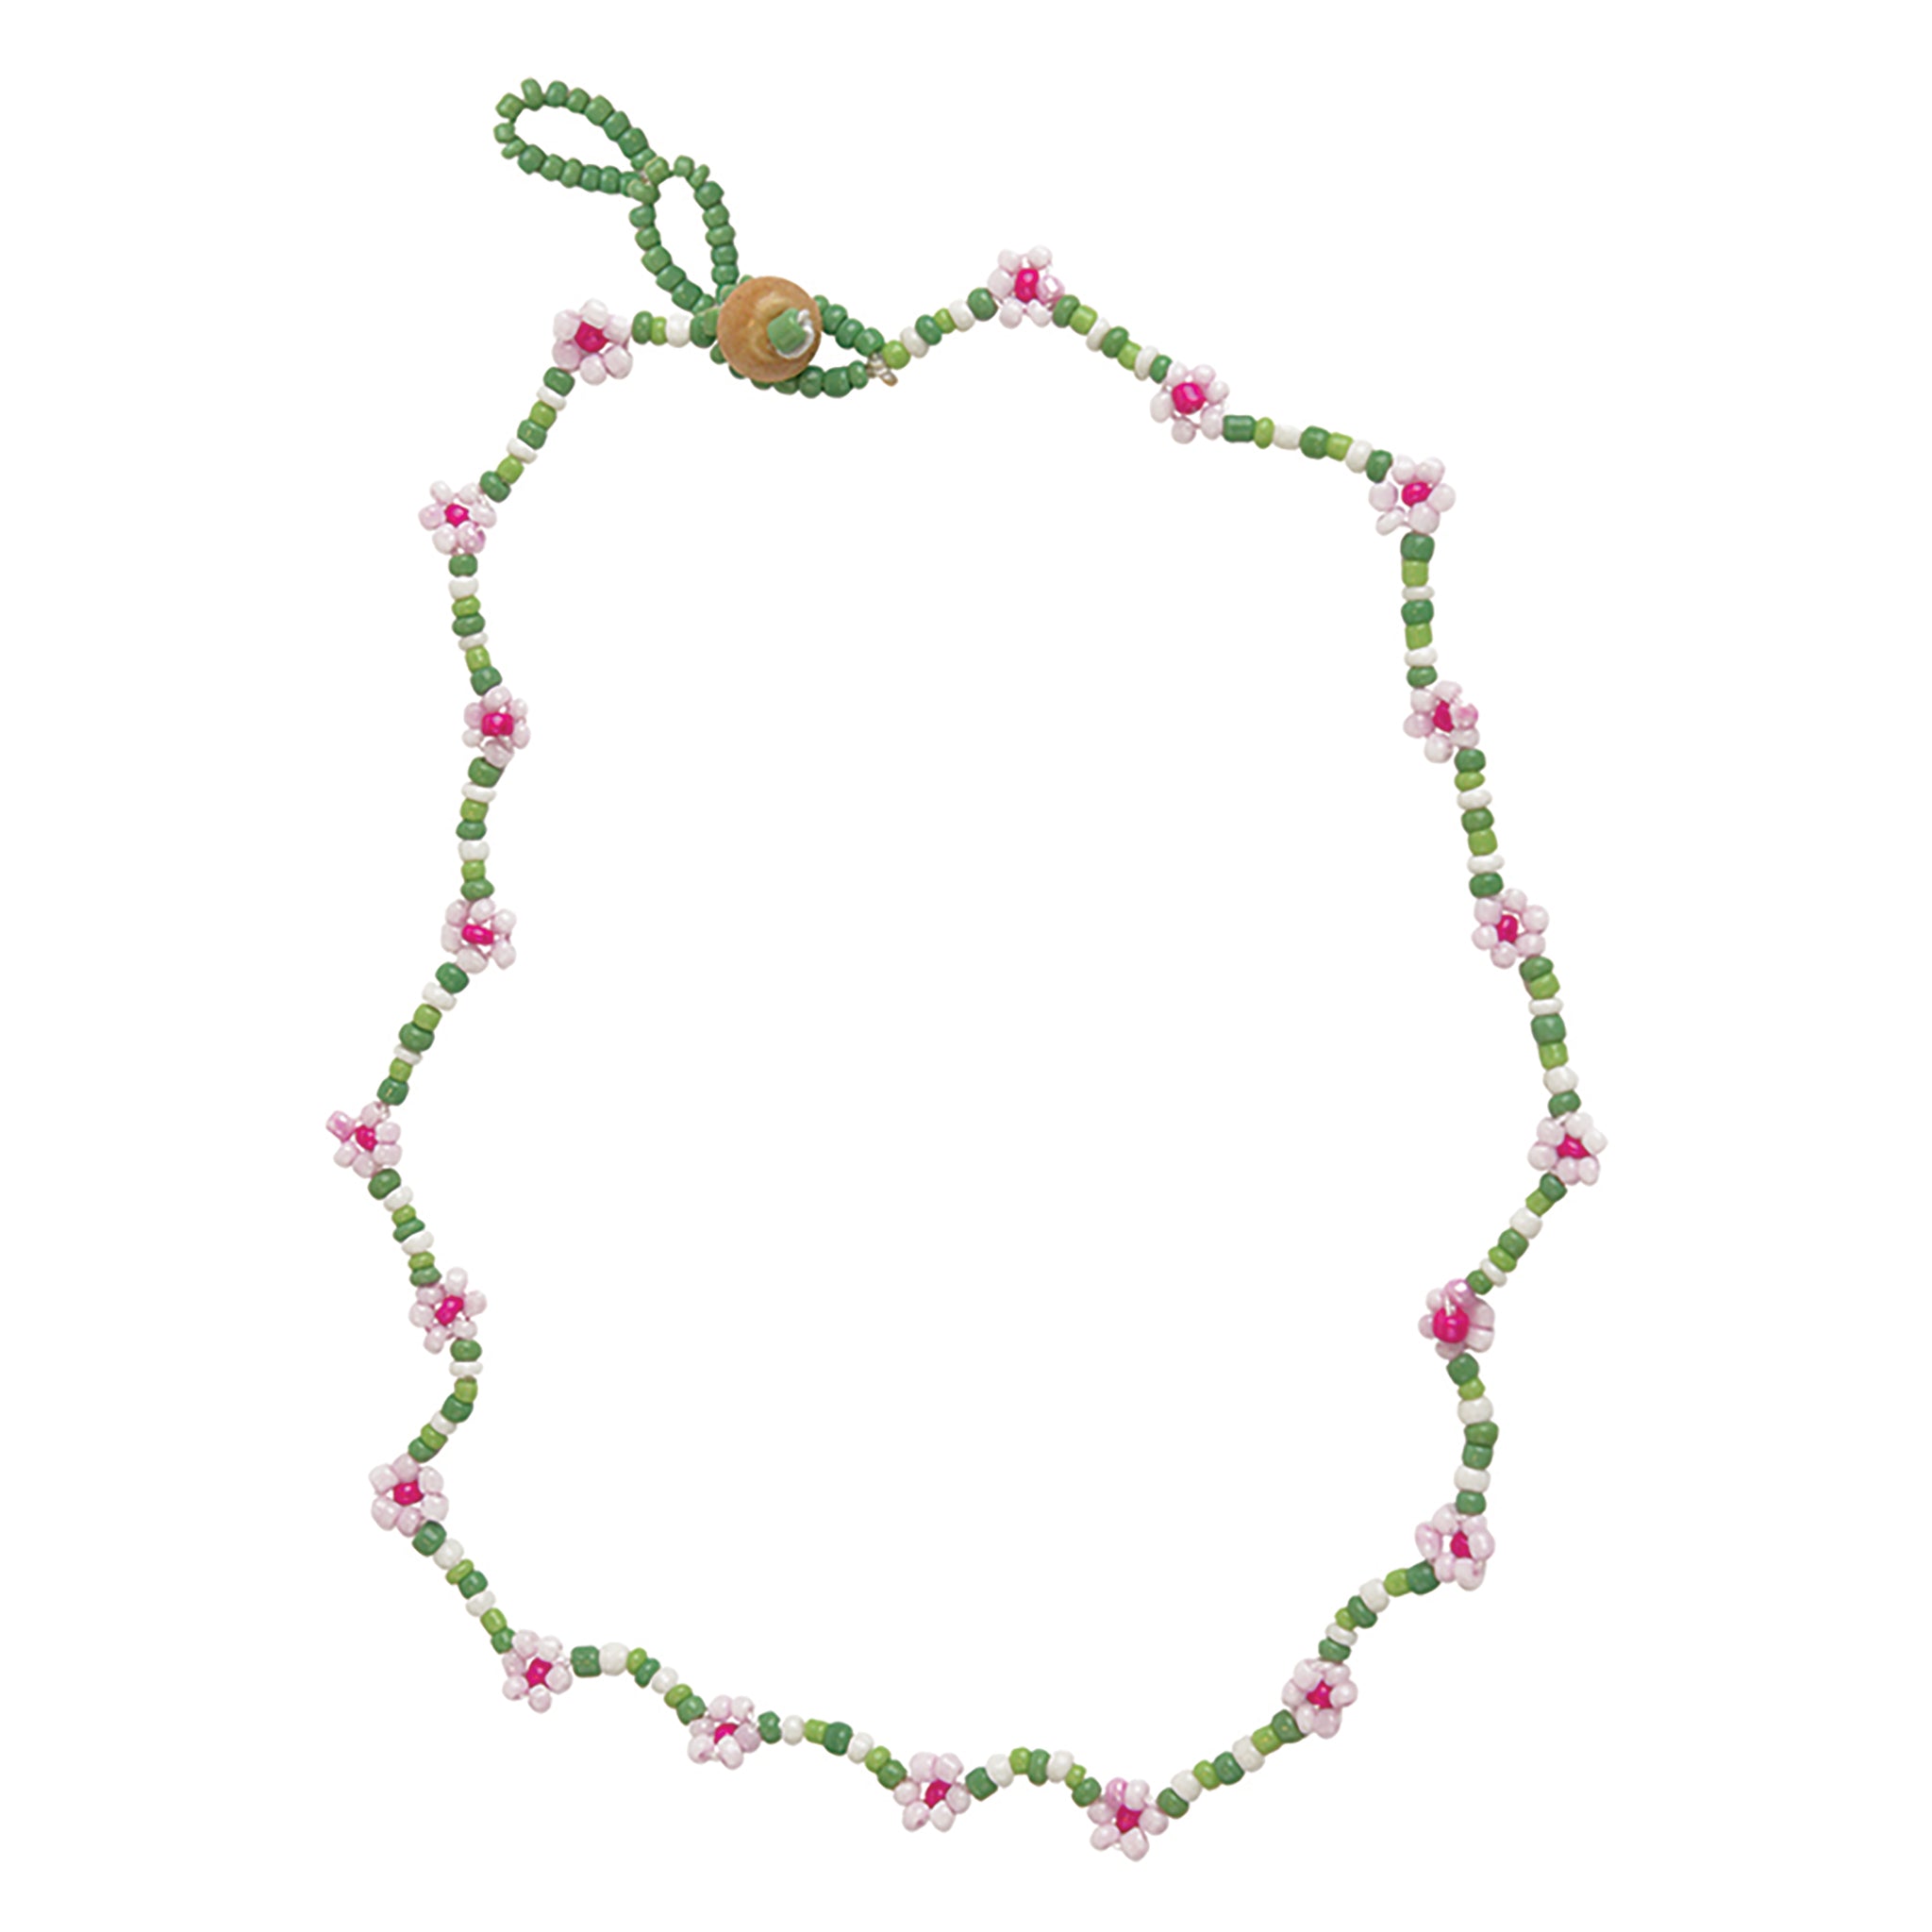 Make your own jewellery kit - makes a pretty beaded blue flower necklace &  pink bracelet - no tools needed - ages 12 years+ — Busy Beading